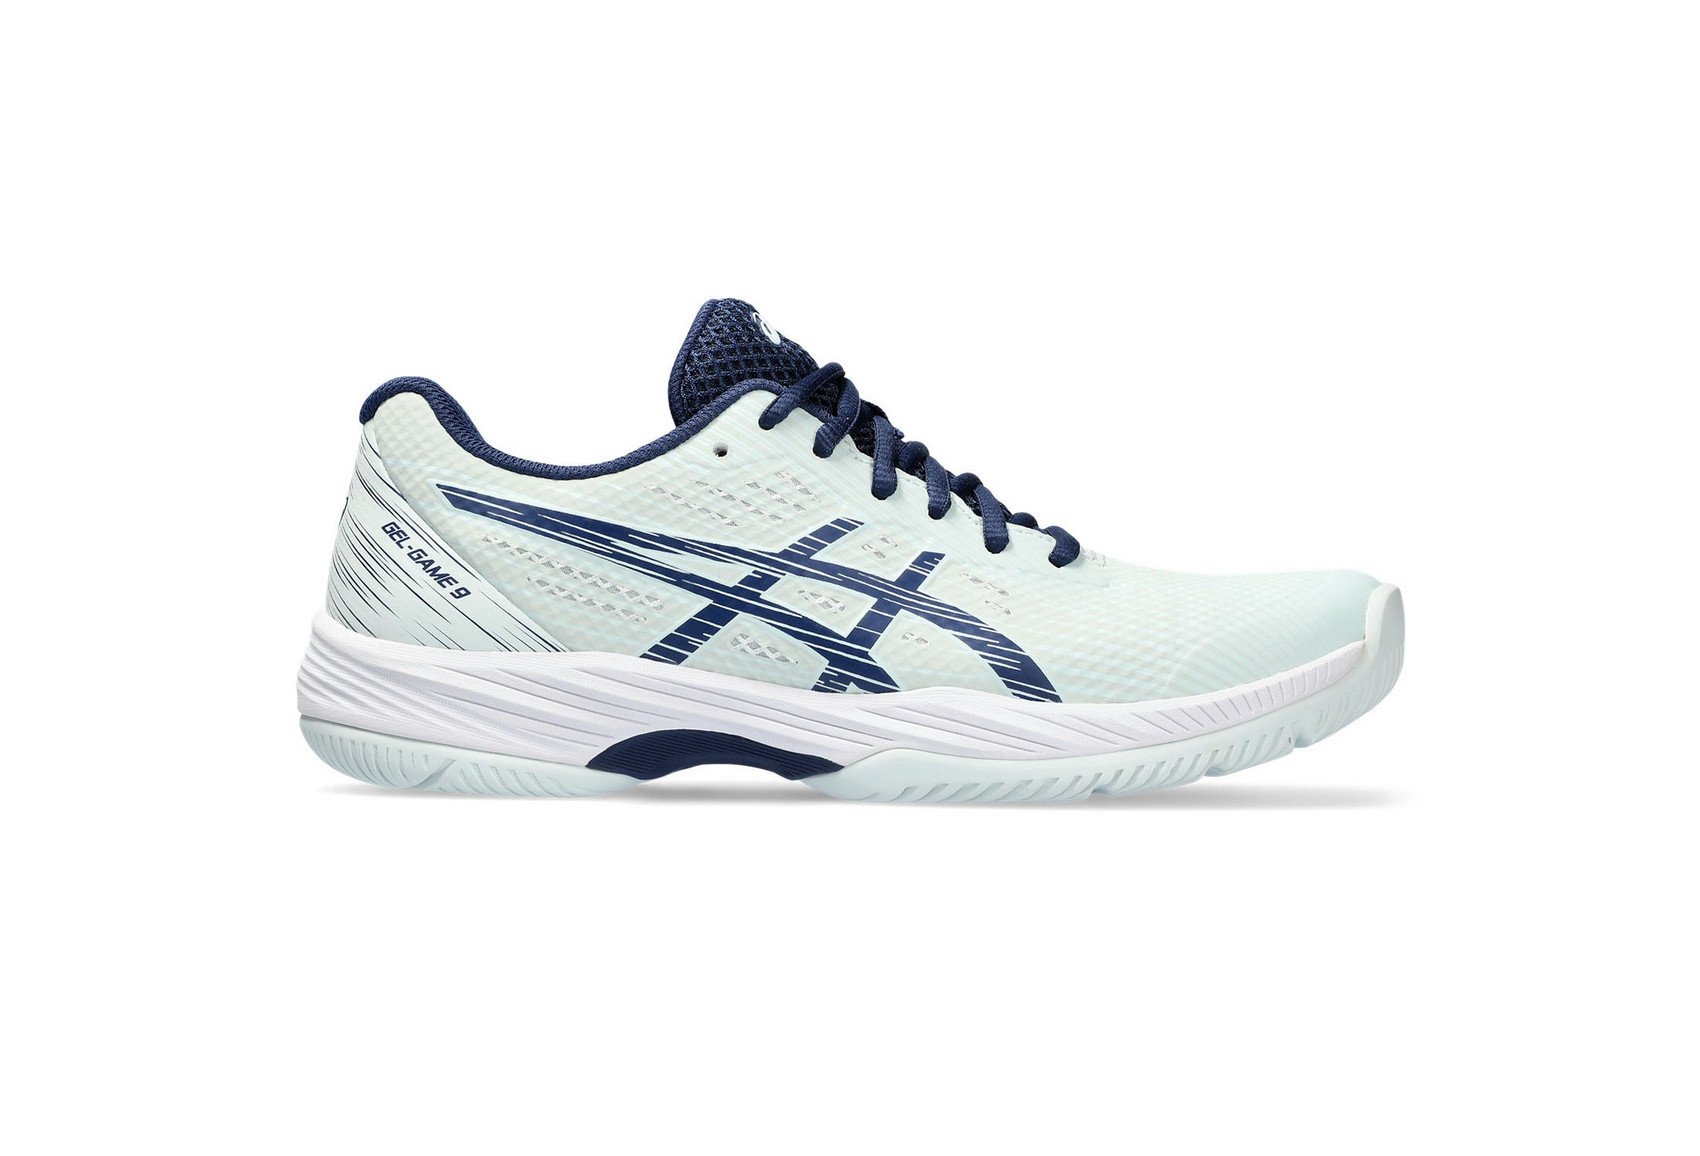 ASICS MENS GEL-RESOLUTION 9 PADEL TENNIS SHOES COURT BREATHABLE